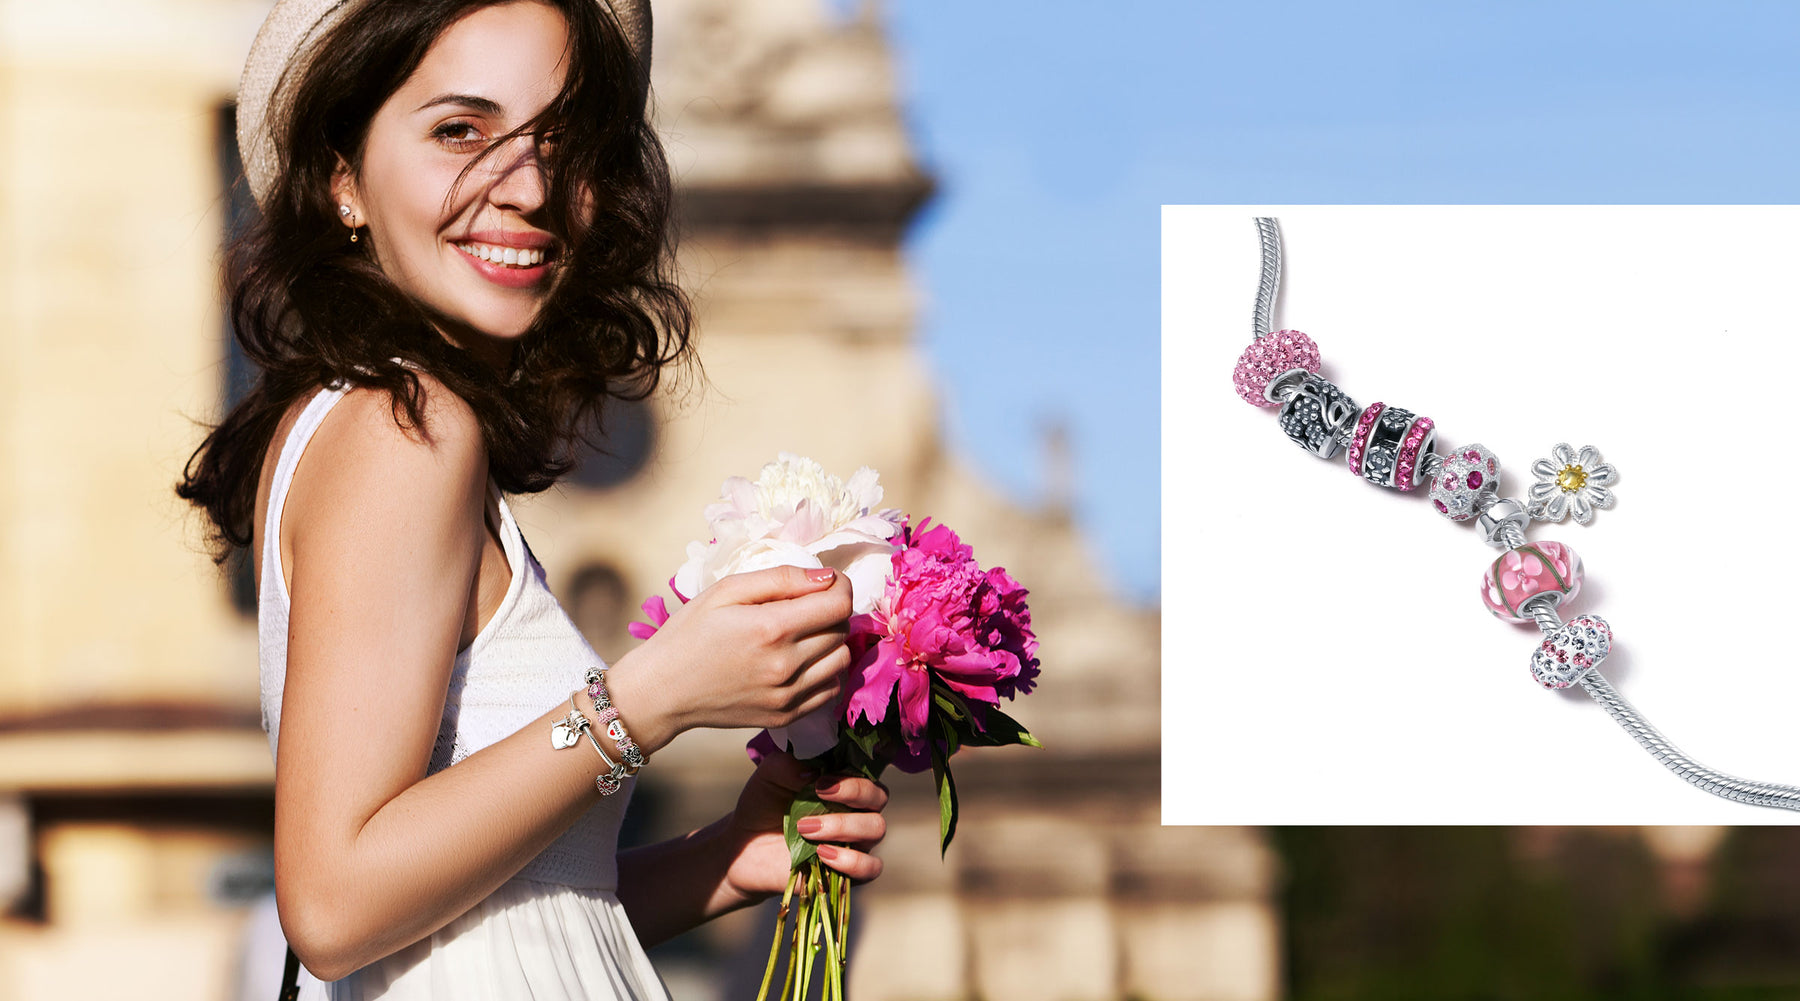 young woman smiling, wearing  charm bracelets and holding flowers